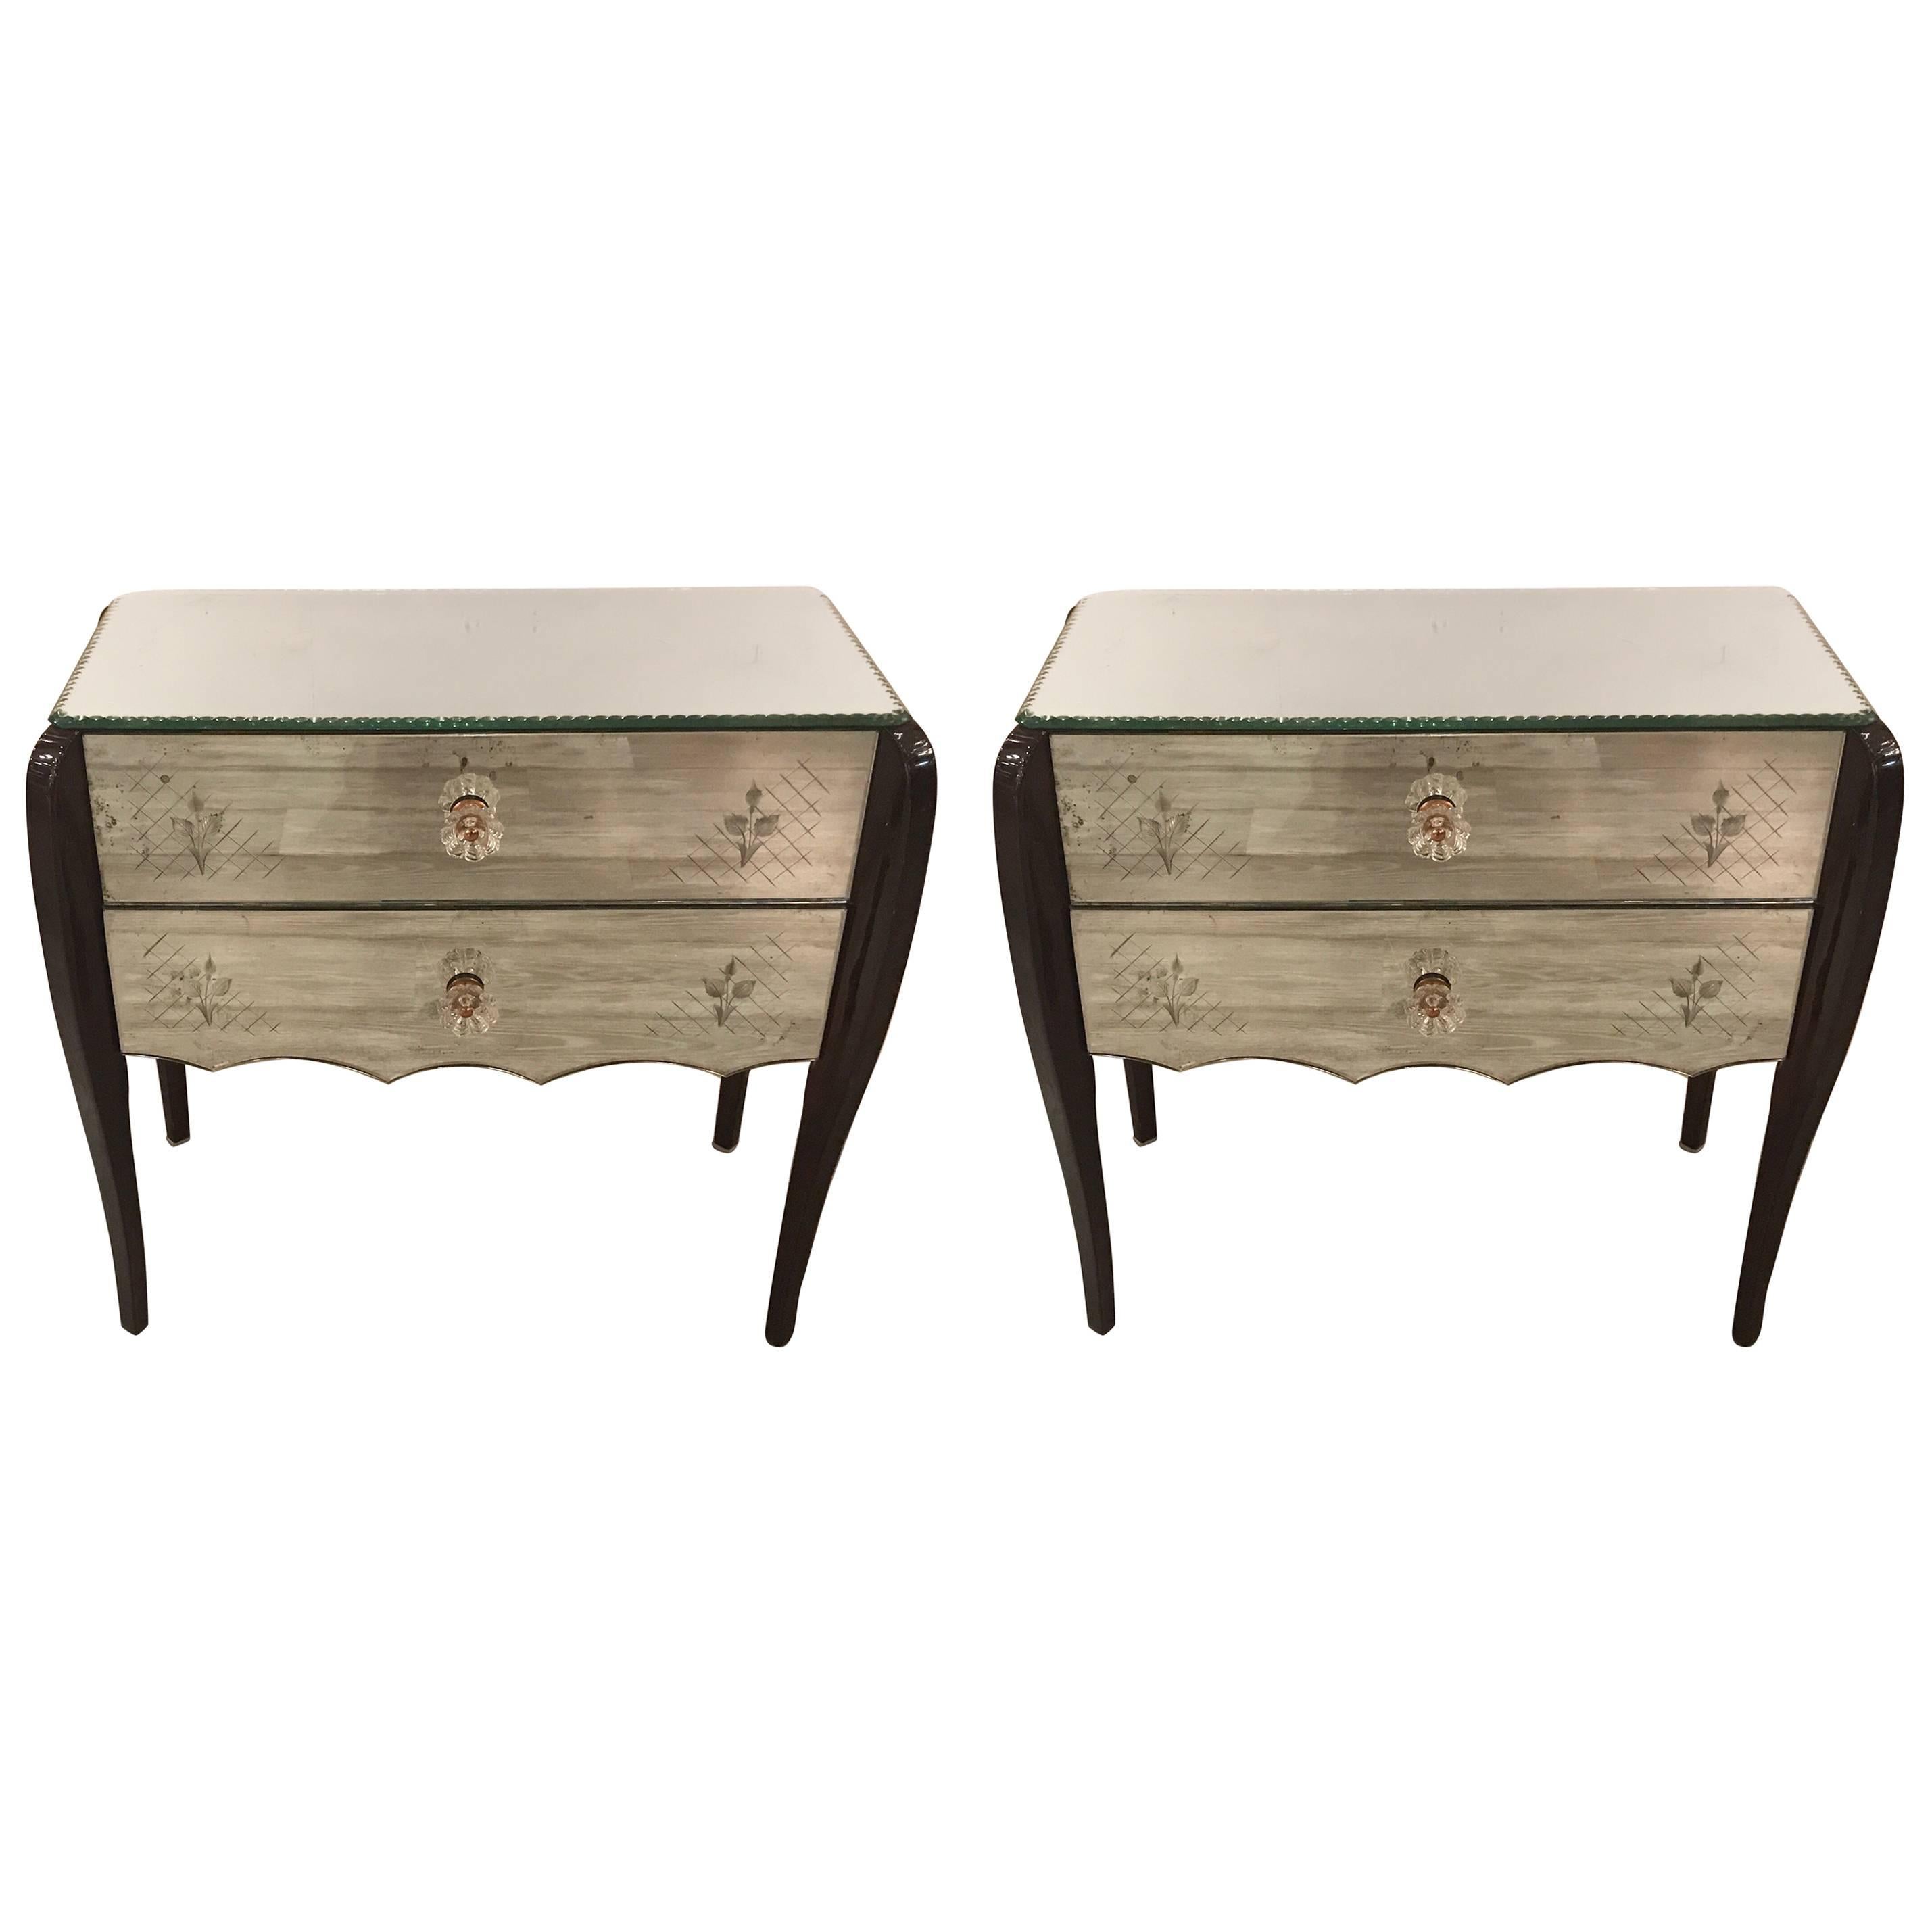 Glamorous Pair of Mirrored French Deco Nightstands